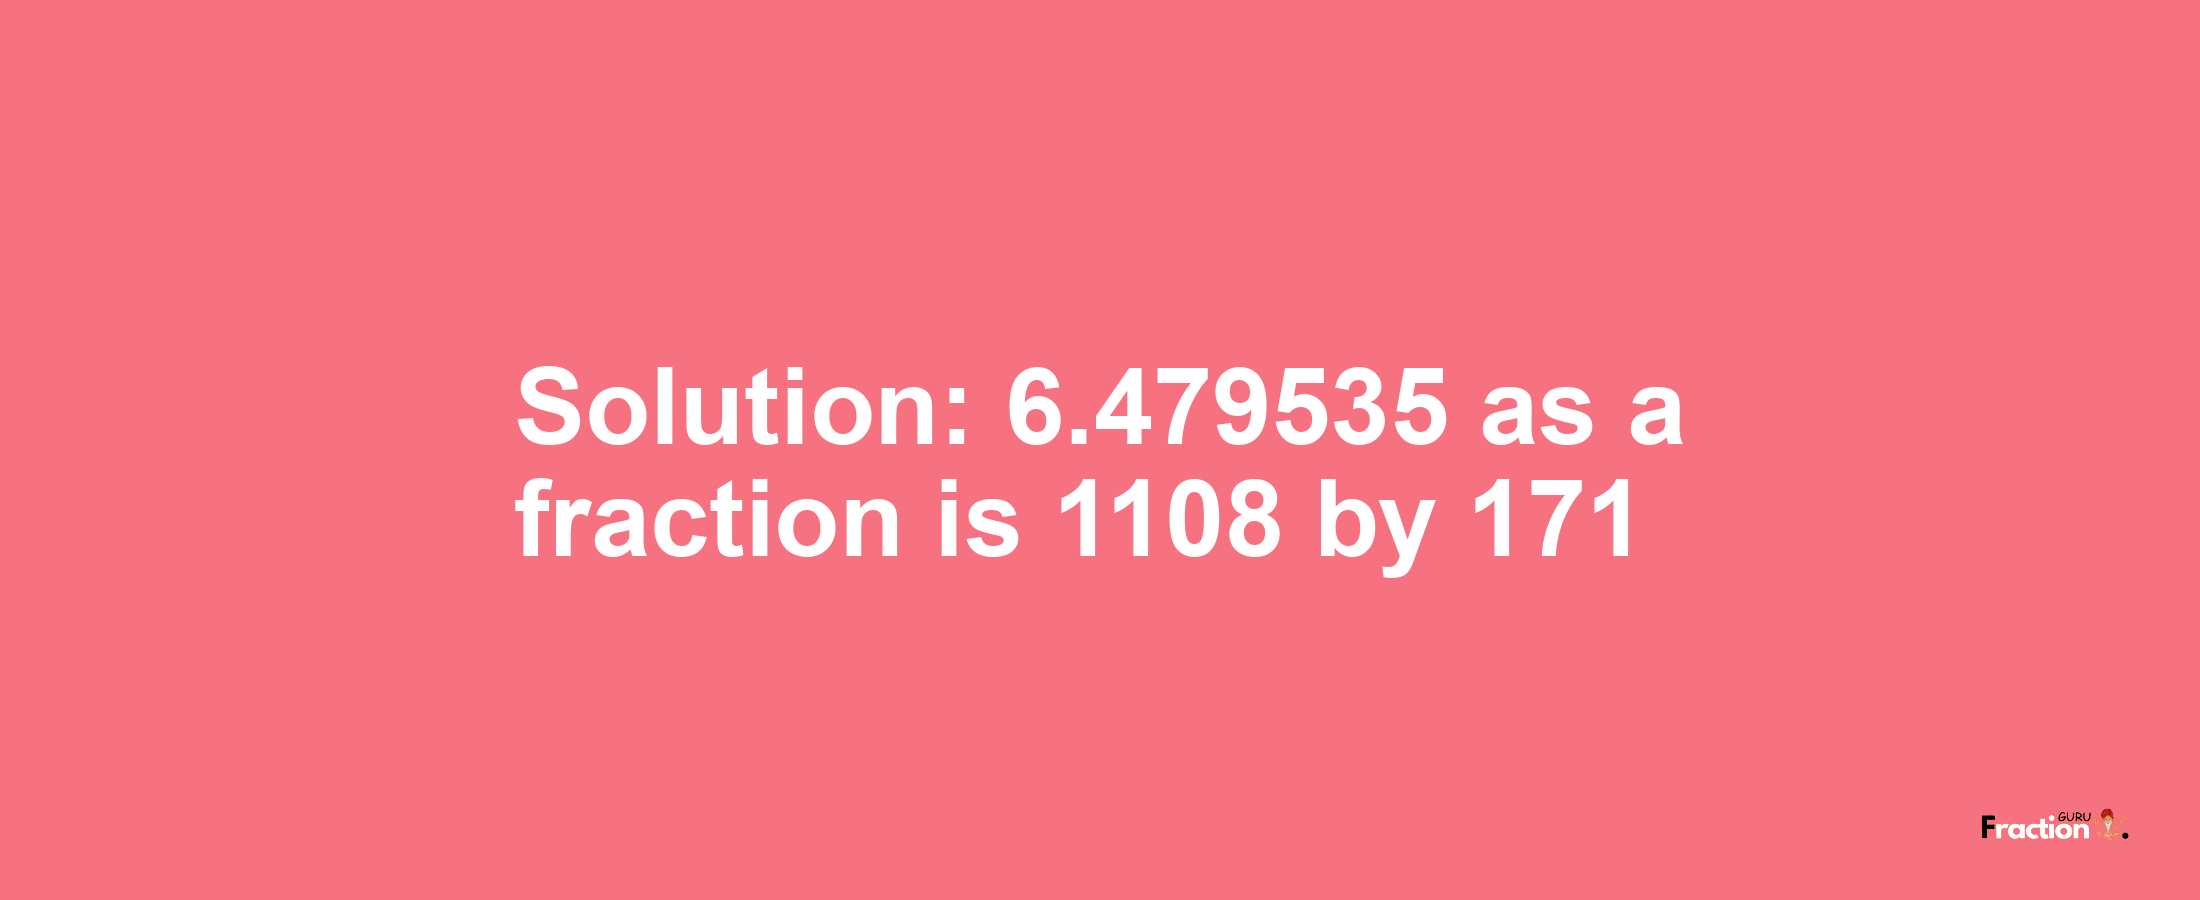 Solution:6.479535 as a fraction is 1108/171